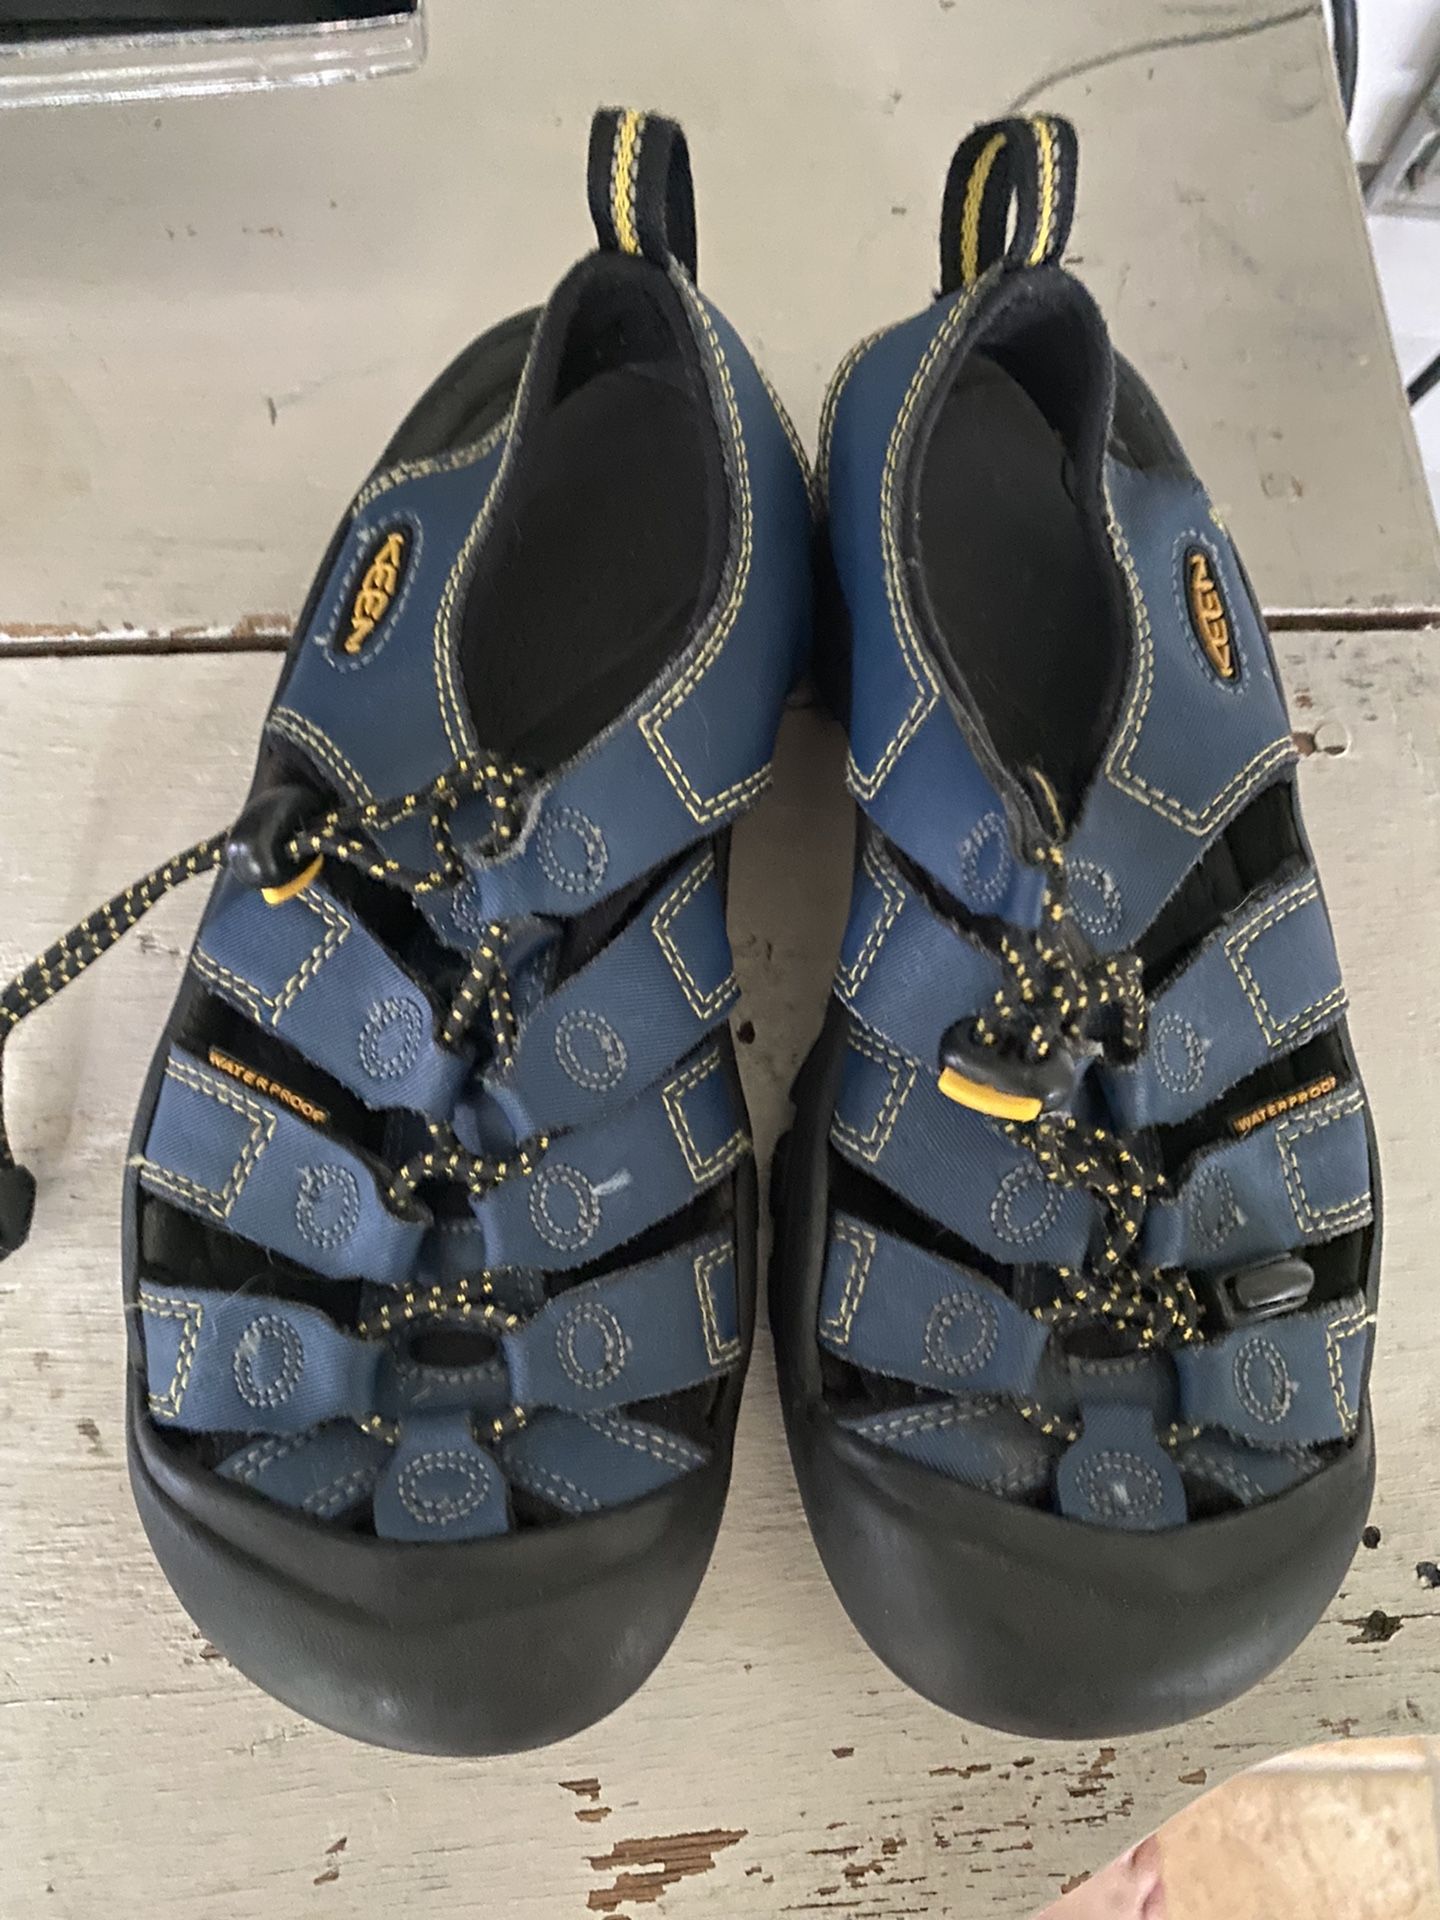 Boys Size 3 Keen Water Shoes